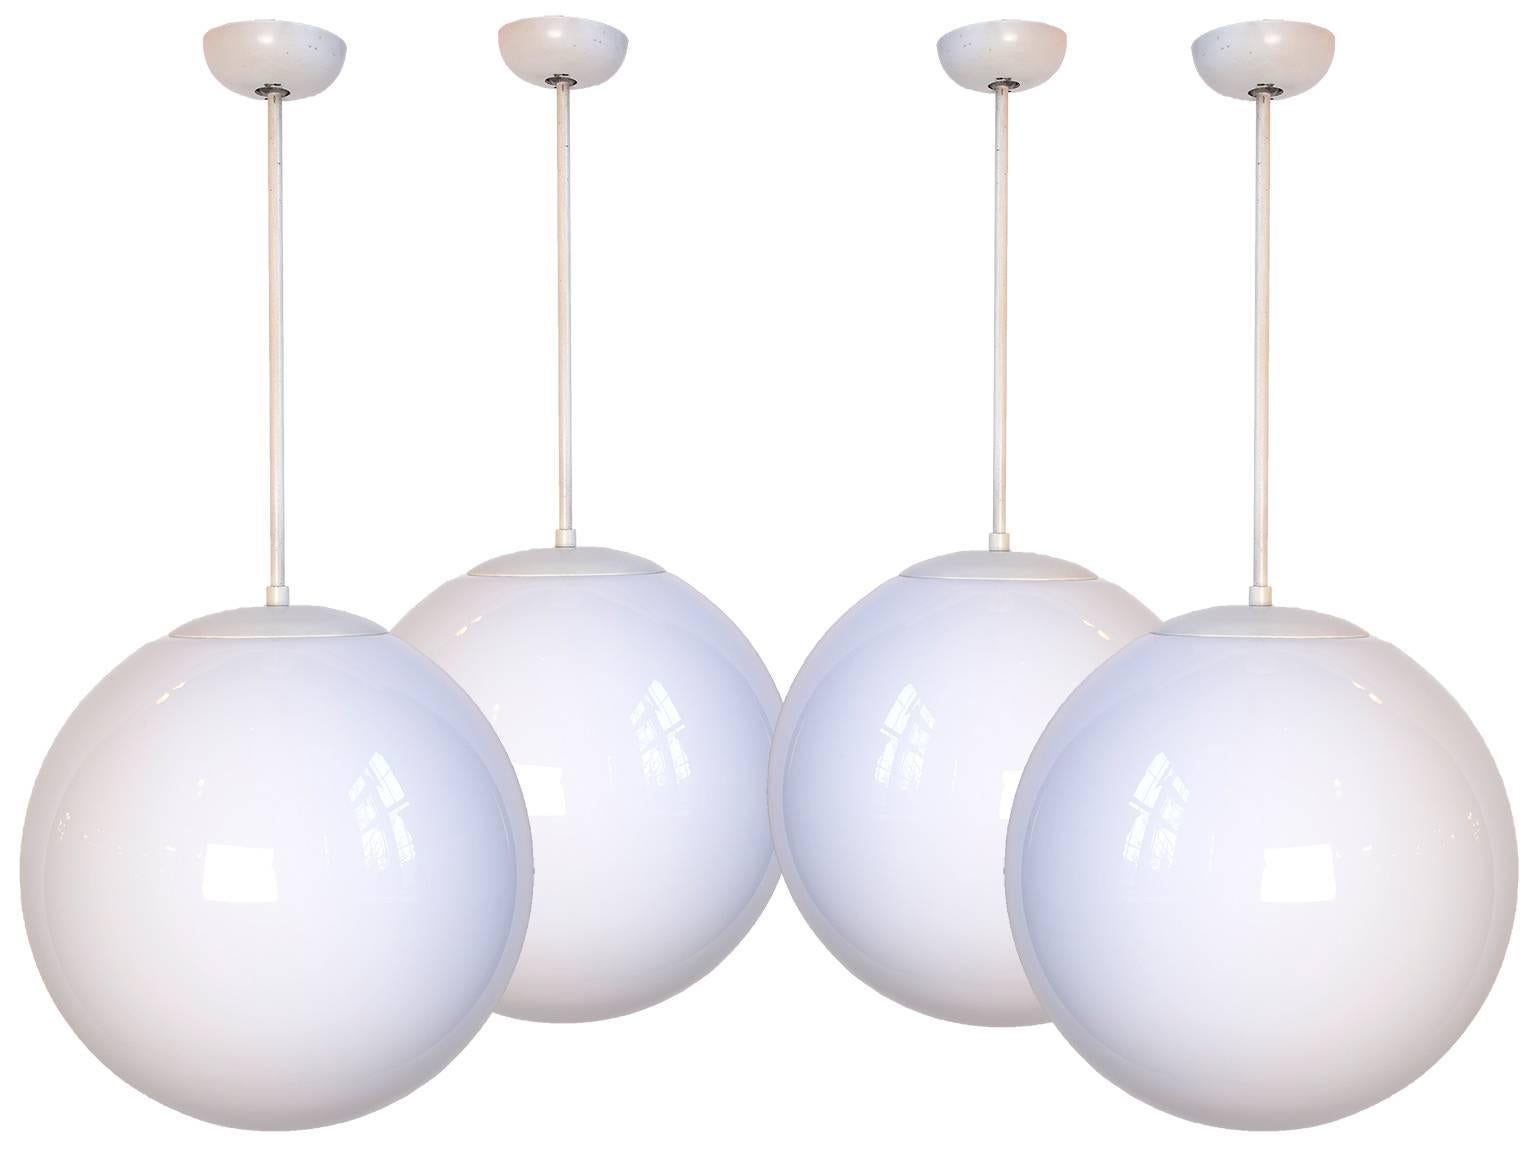 These fixtures are a streamlined and clean look from the early 1960's. Each fixture includes a milk glass spherical globe with an original pole pendant, fitter, and canopy. They look great hanging together in a running line or at staggered